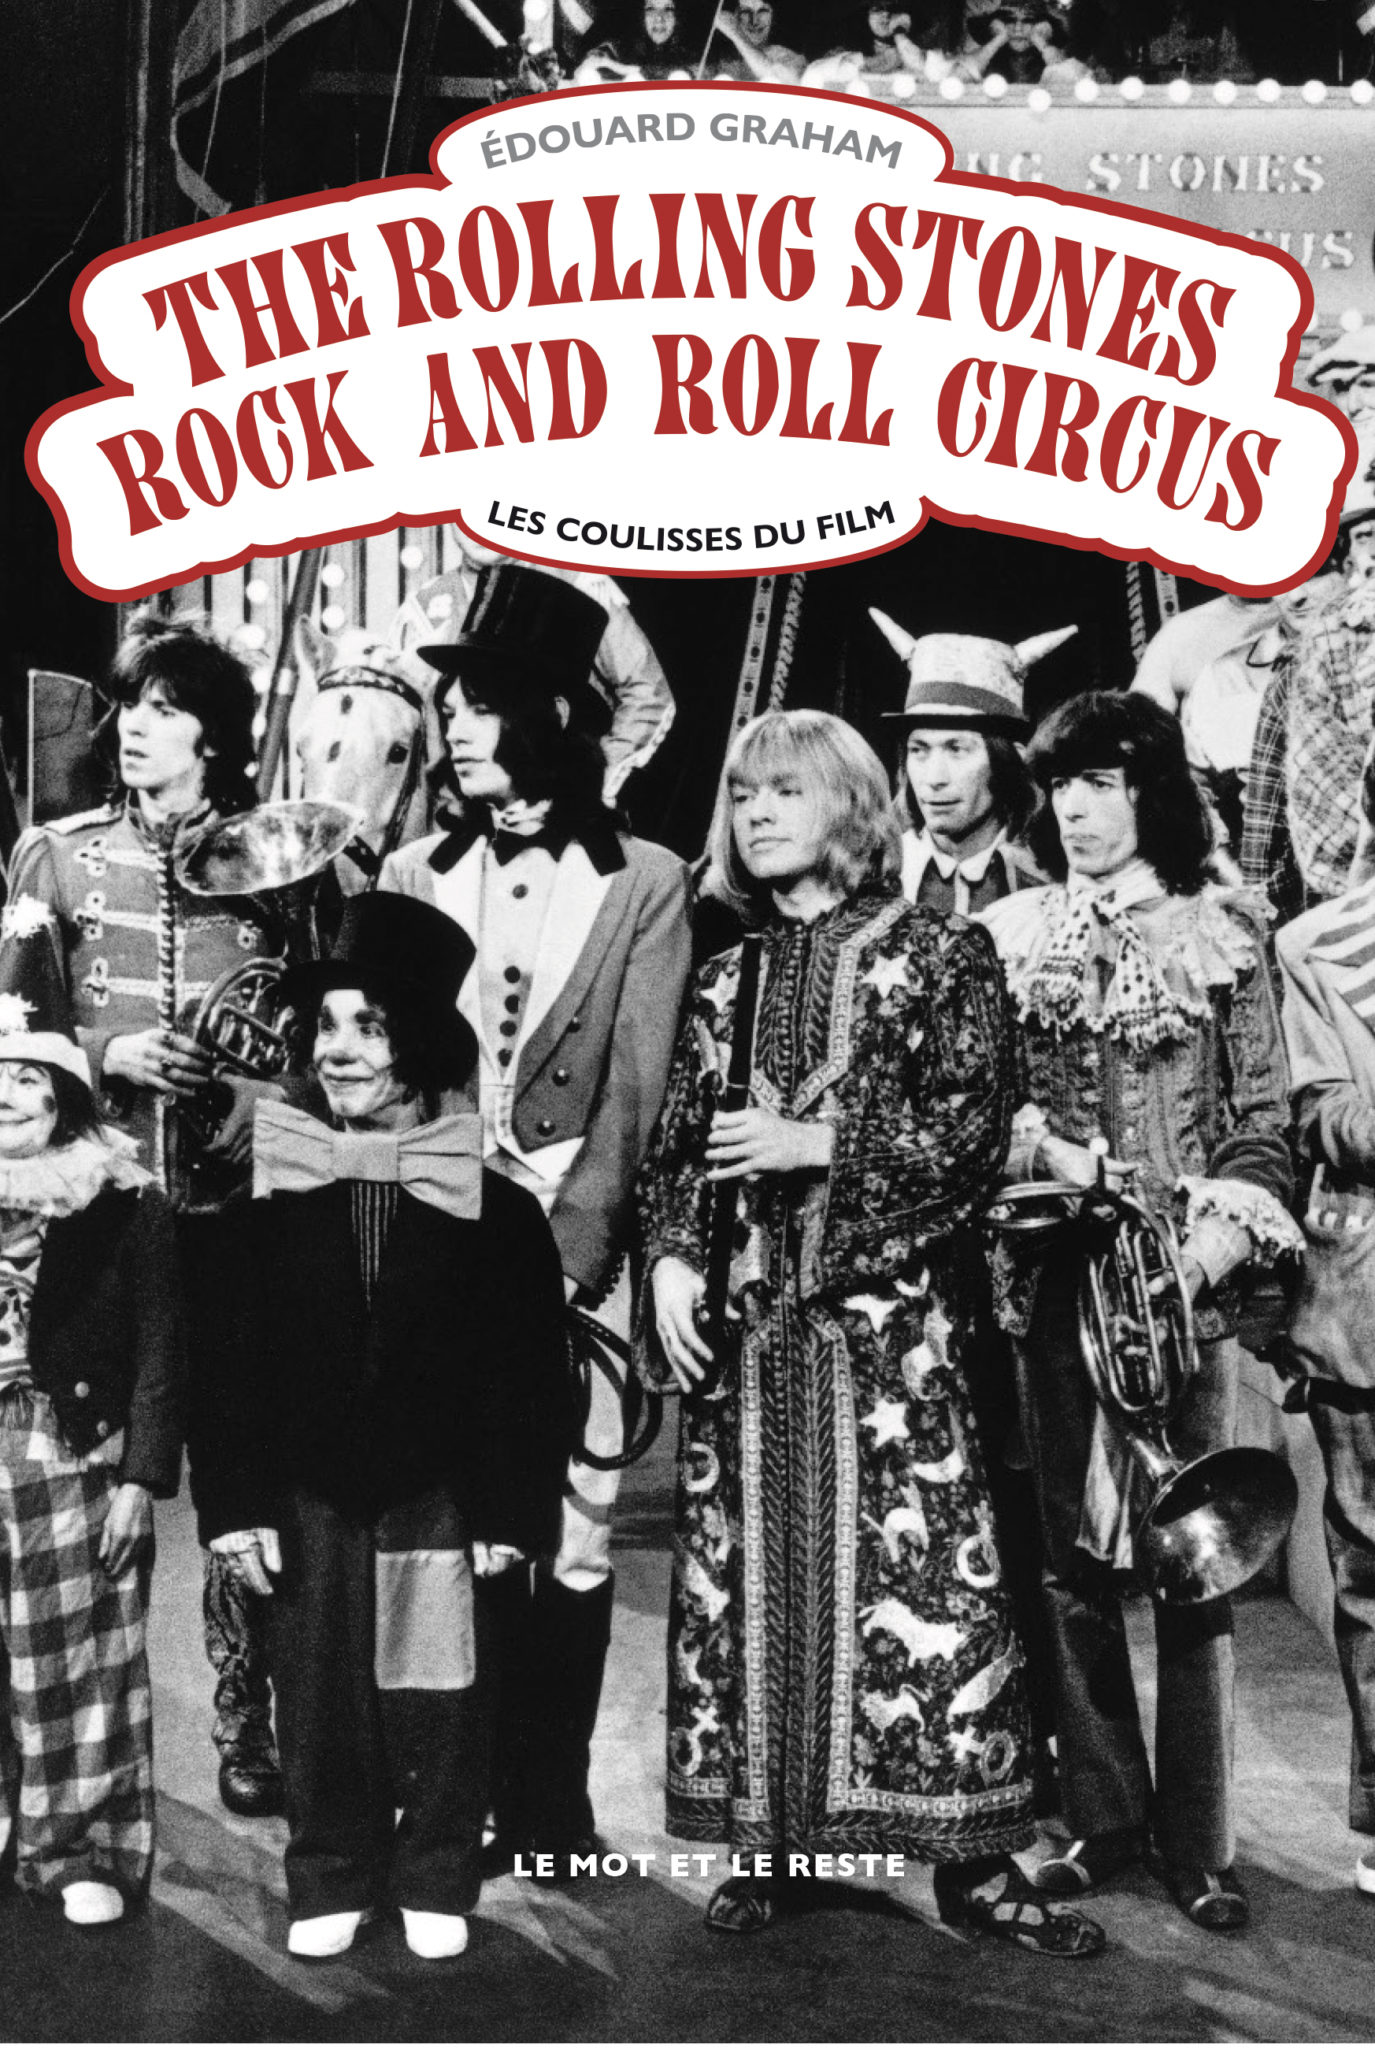 The Rolling Stones Rock And Roll Circus Daily Passions 1777